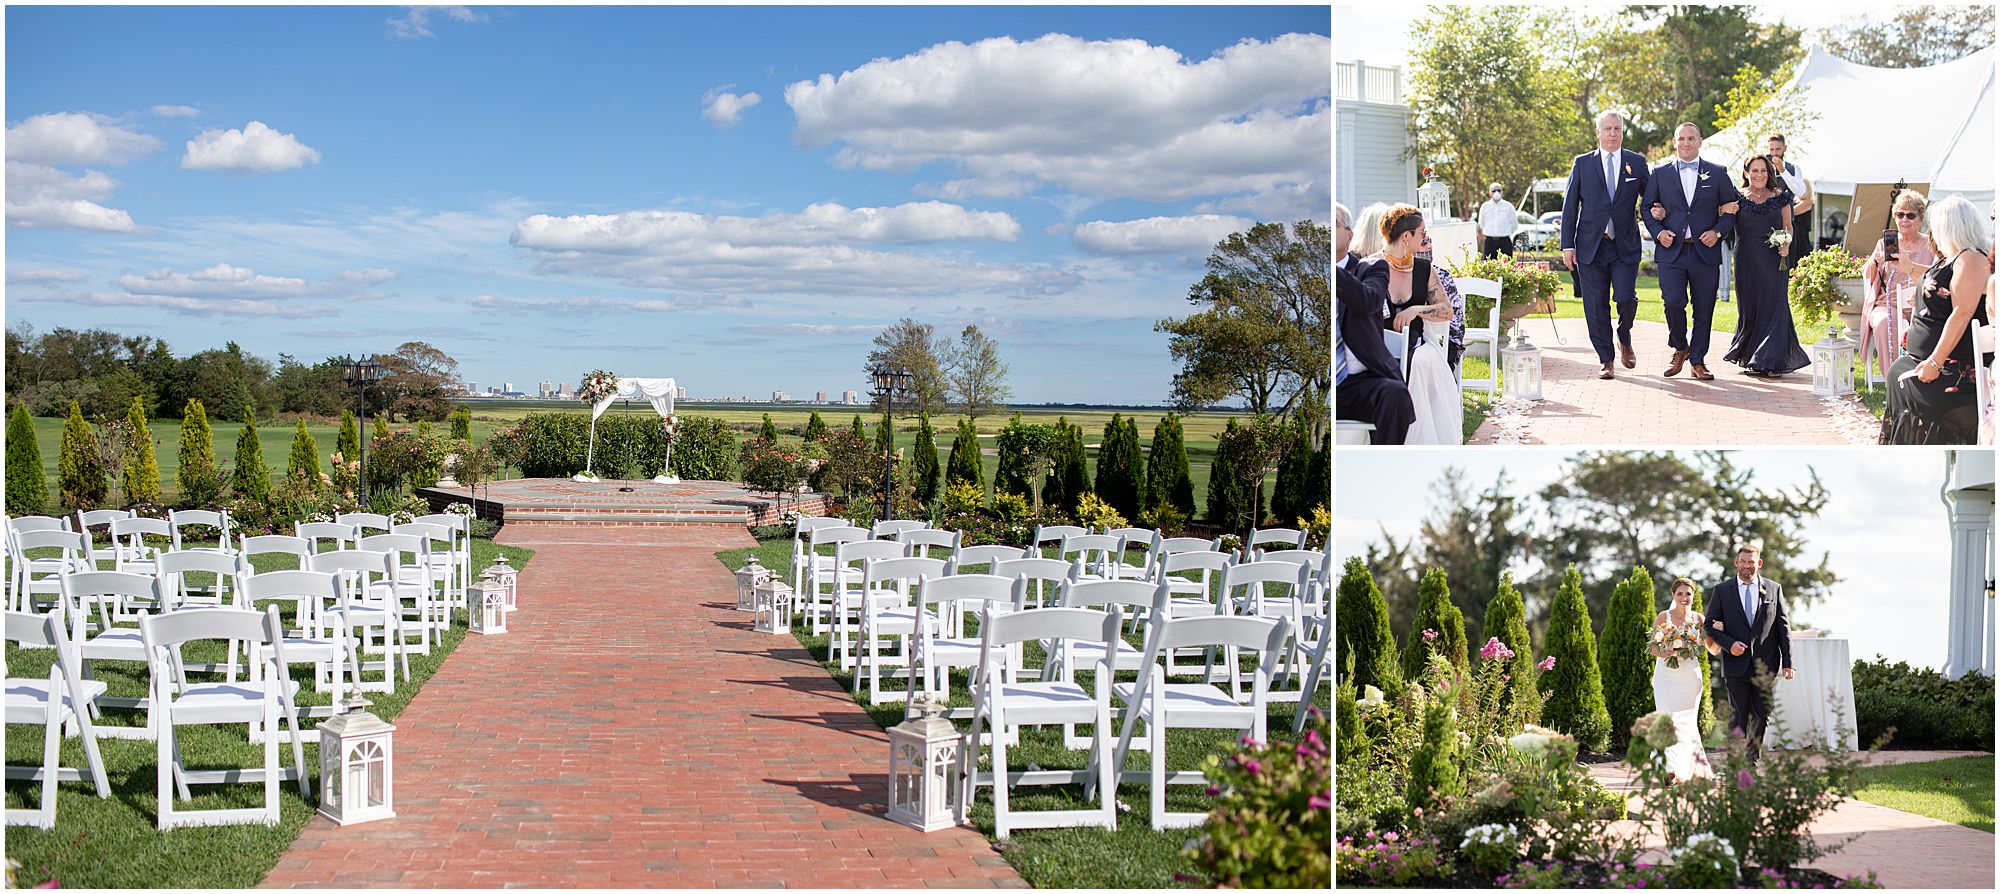 The ceremony site at the Atlantic City Country Club is why it is one of the best south jersey wedding venues. 